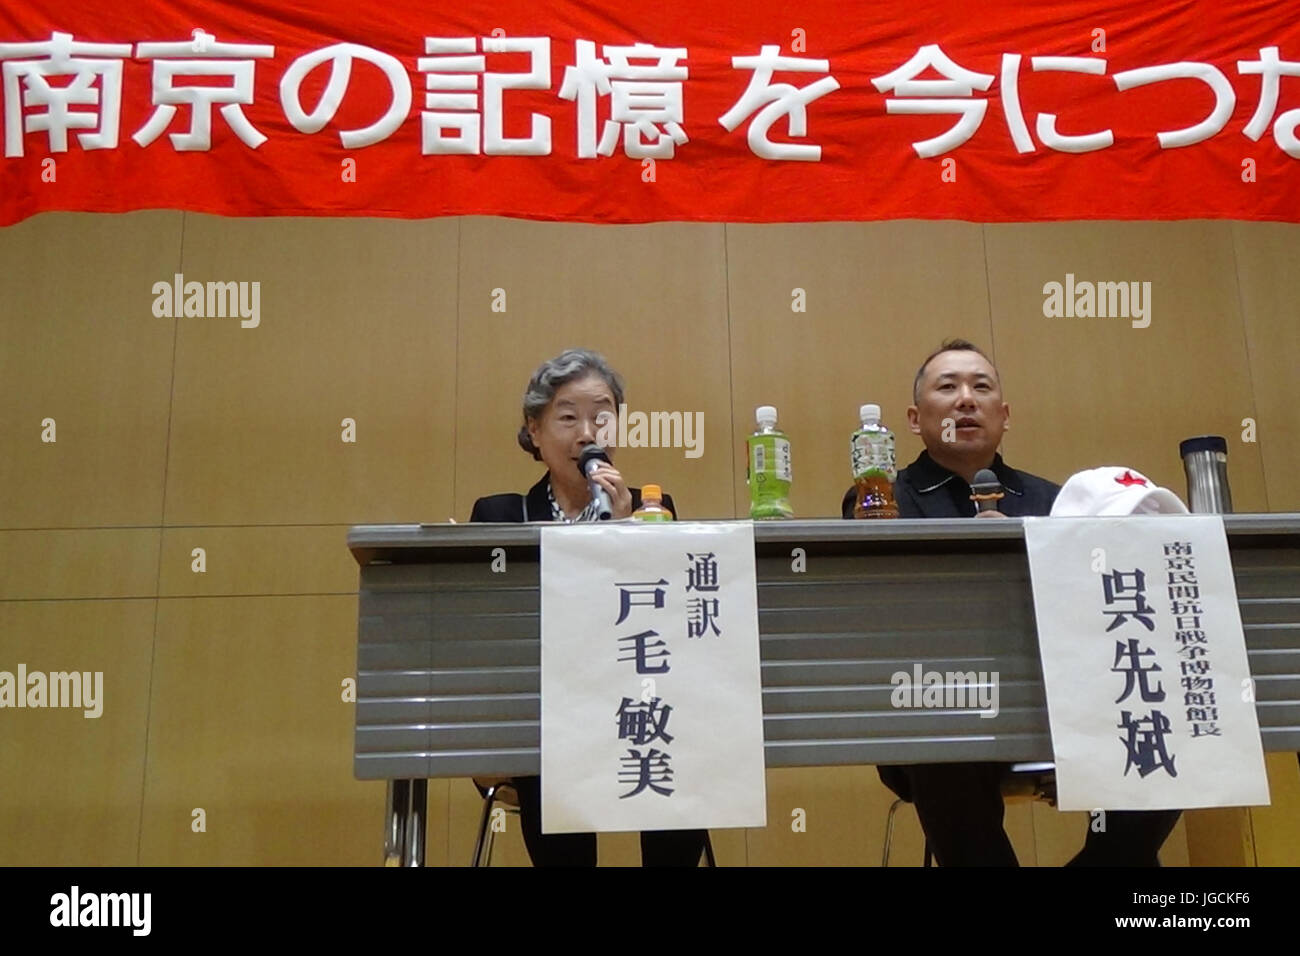 Nanjing. 6th July, 2017. Wu Xianbin (R) makes a speech during a campaign with Japanese pacifists in Osaka, Japan, Dec. 3, 2016. Wu Xianbin, a Nanjing-based businessman, opened to the public in 2006 a privately-invested exhibition hall of Nanjing folk Anti-Japanese War museum that holds his personal collection of historical photos, Japanese military maps and other wartime heritage items. Now, with the collection of more than 5,700 wartime heritage items, 40,000 books and documents, the museum becomes a patriotic education base for local schools and companies. Credit: Xinhua/Alamy Live News Stock Photo